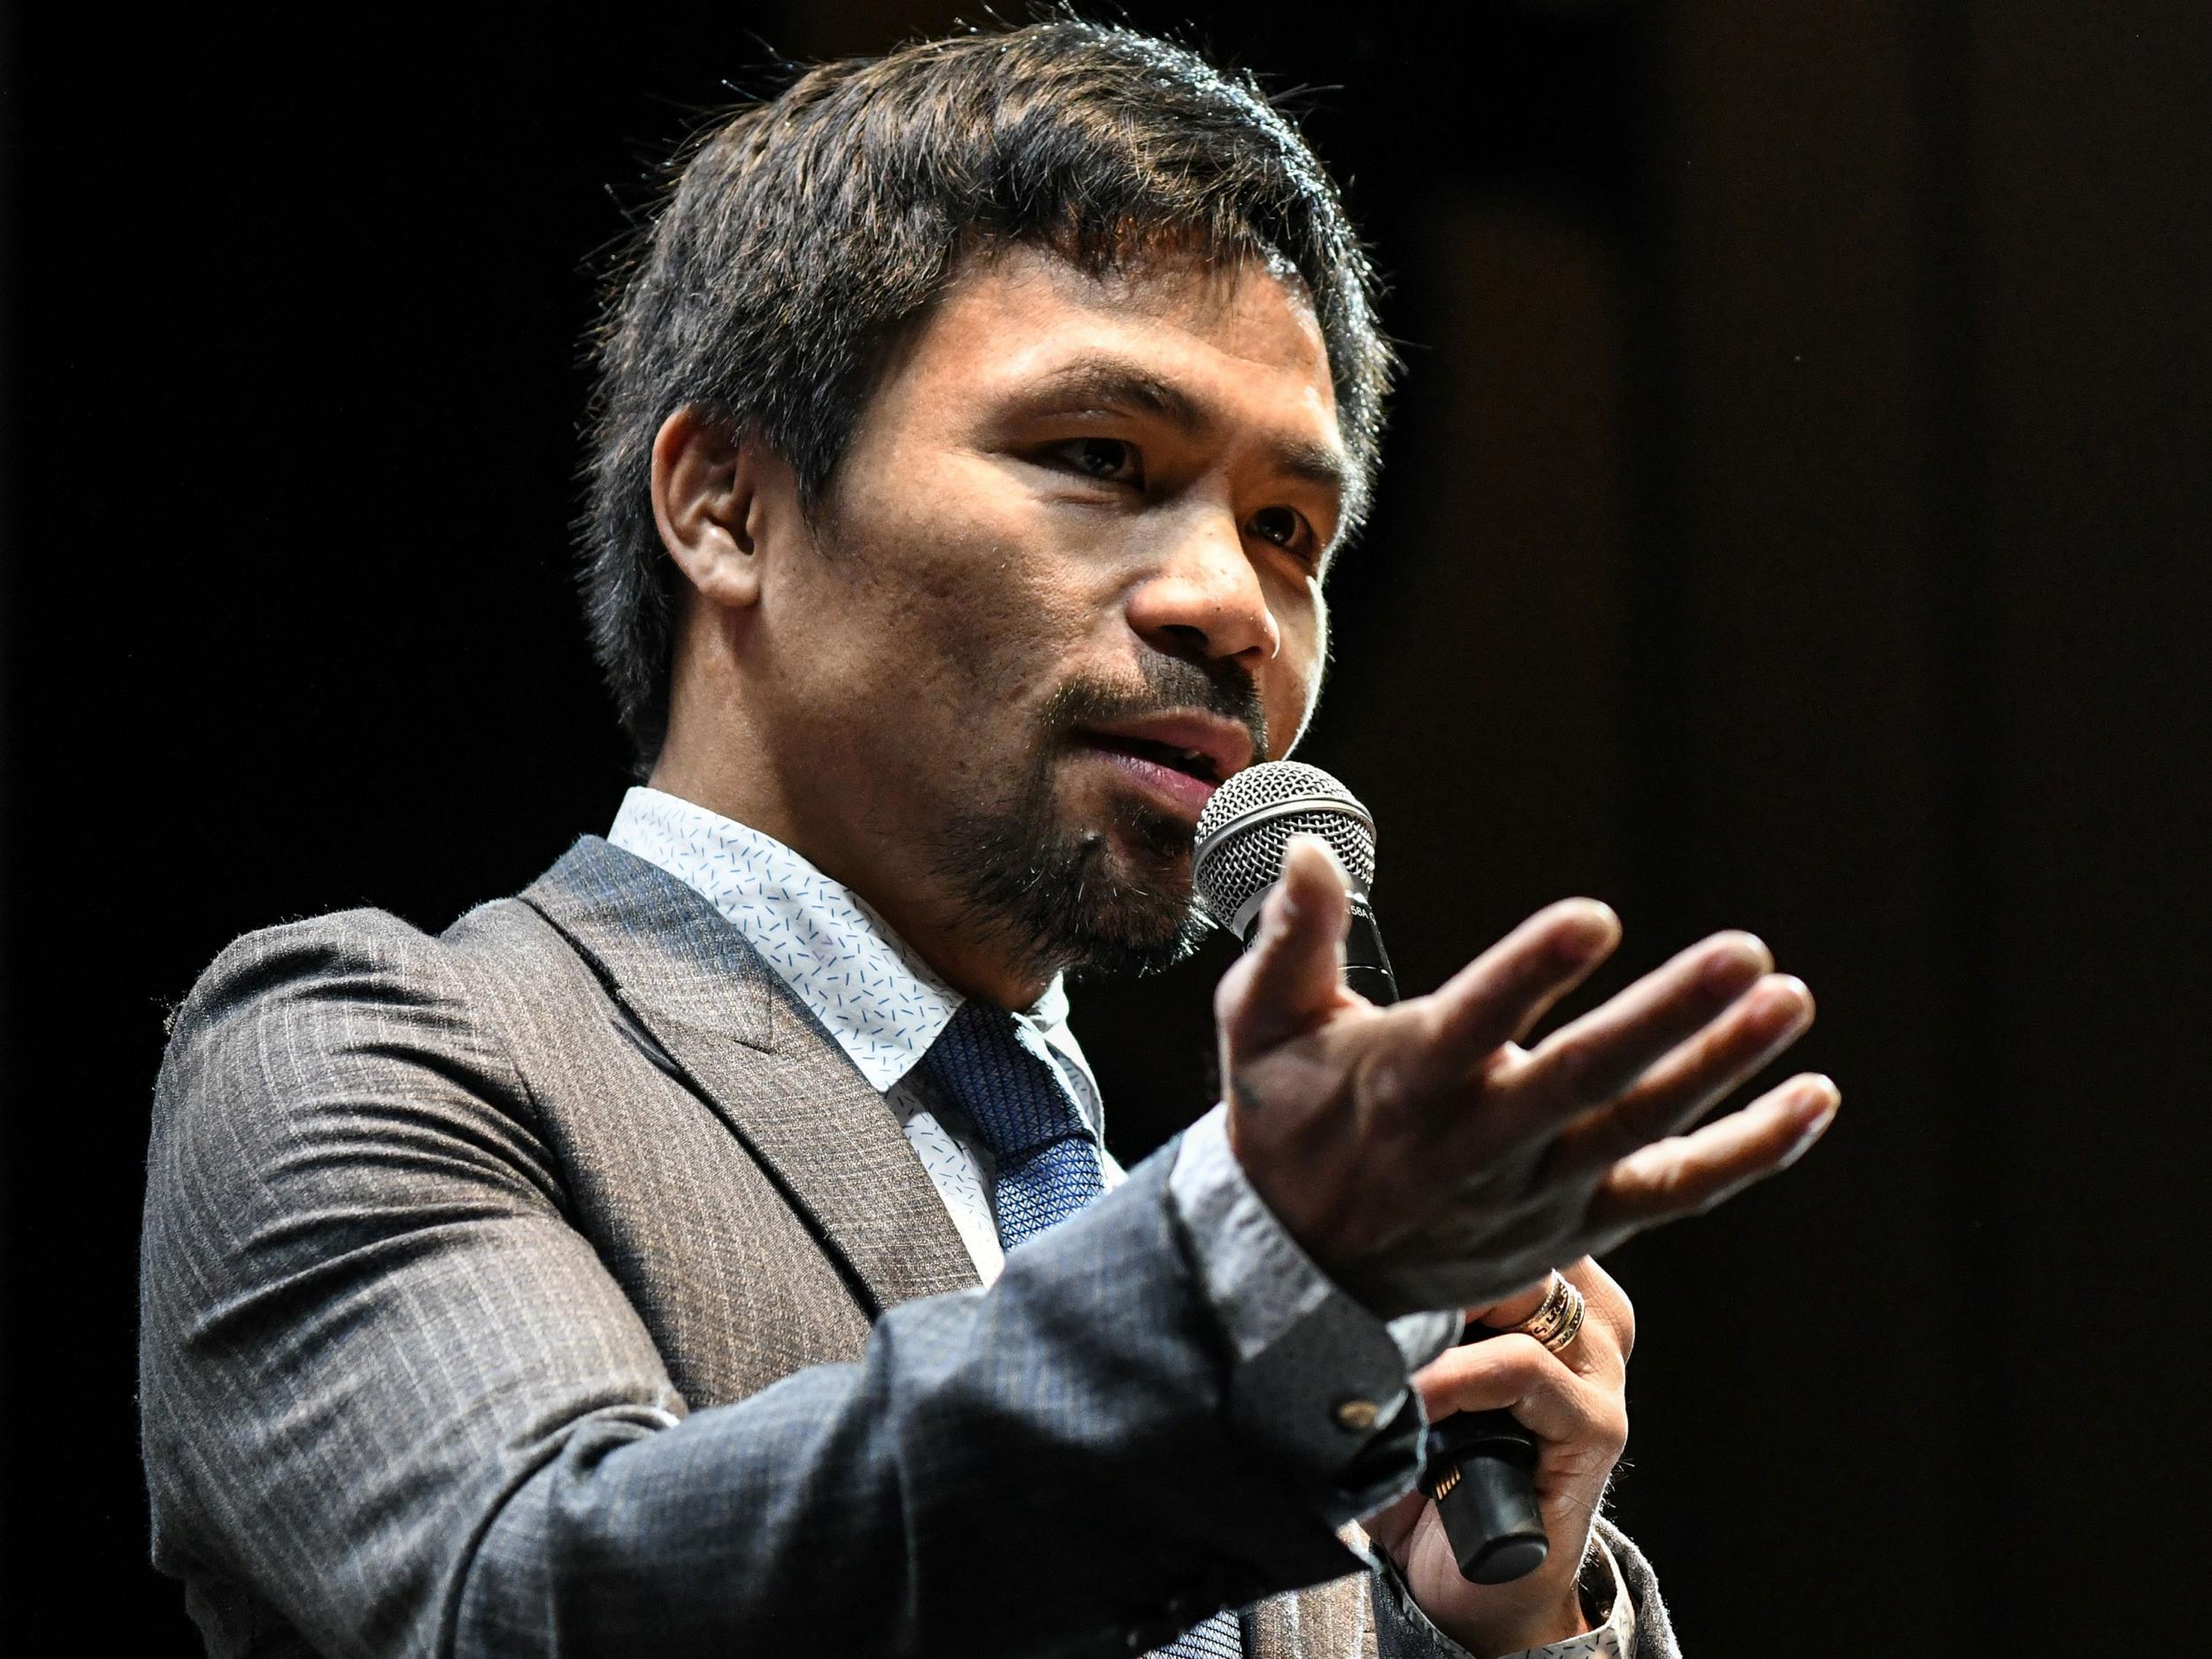 Manny Pacquiao has no intention of hanging up his gloves just yet